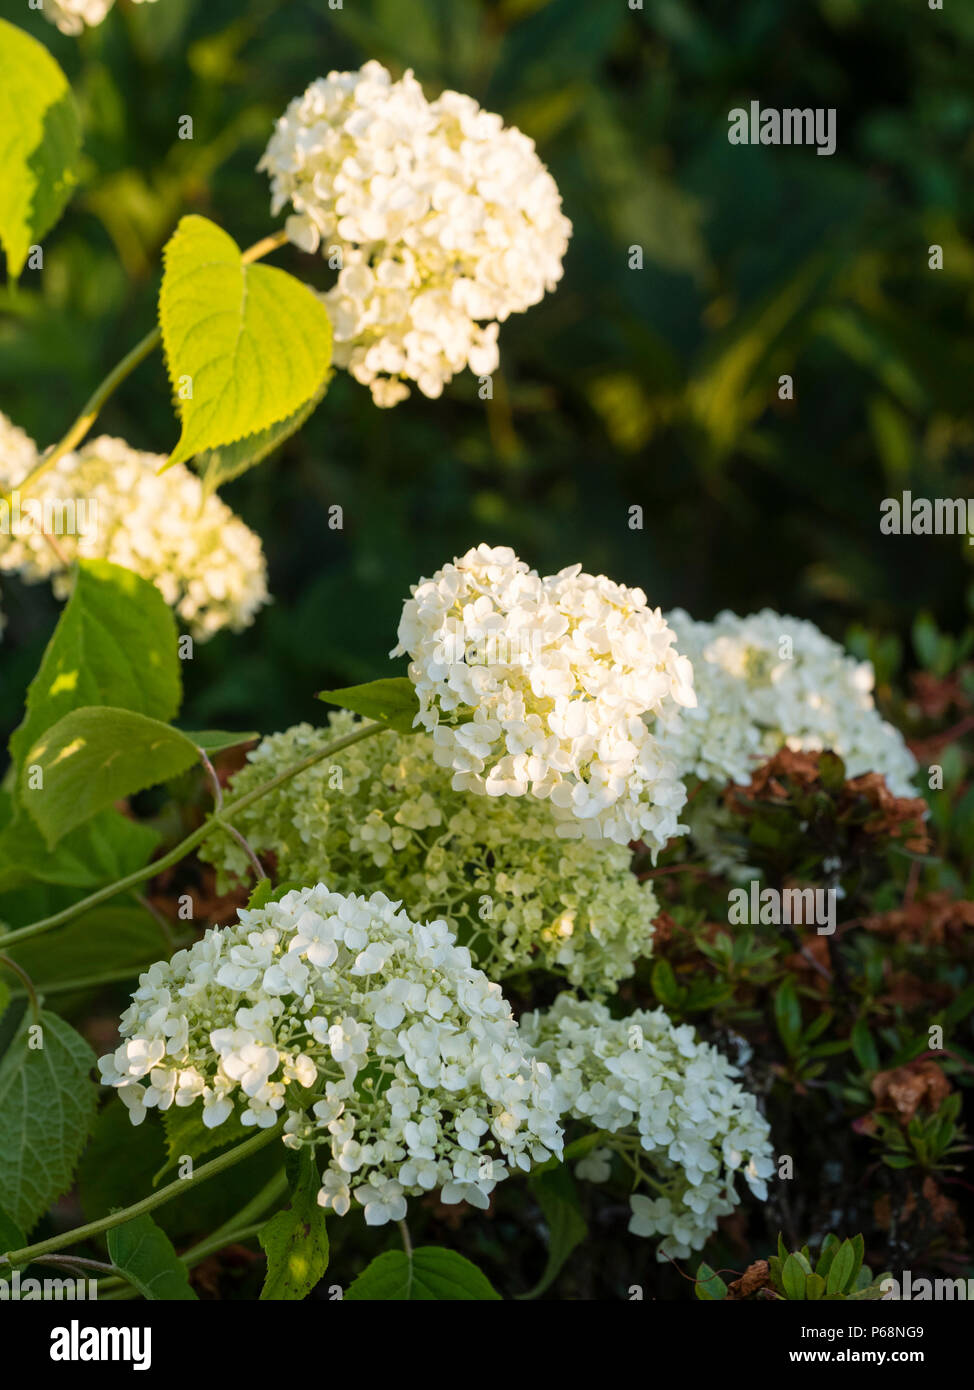 Mophead flower trusses of the tree hydrangea variety, Hydrangea arborescens 'Incrediball', selected for it's non flopping habit Stock Photo